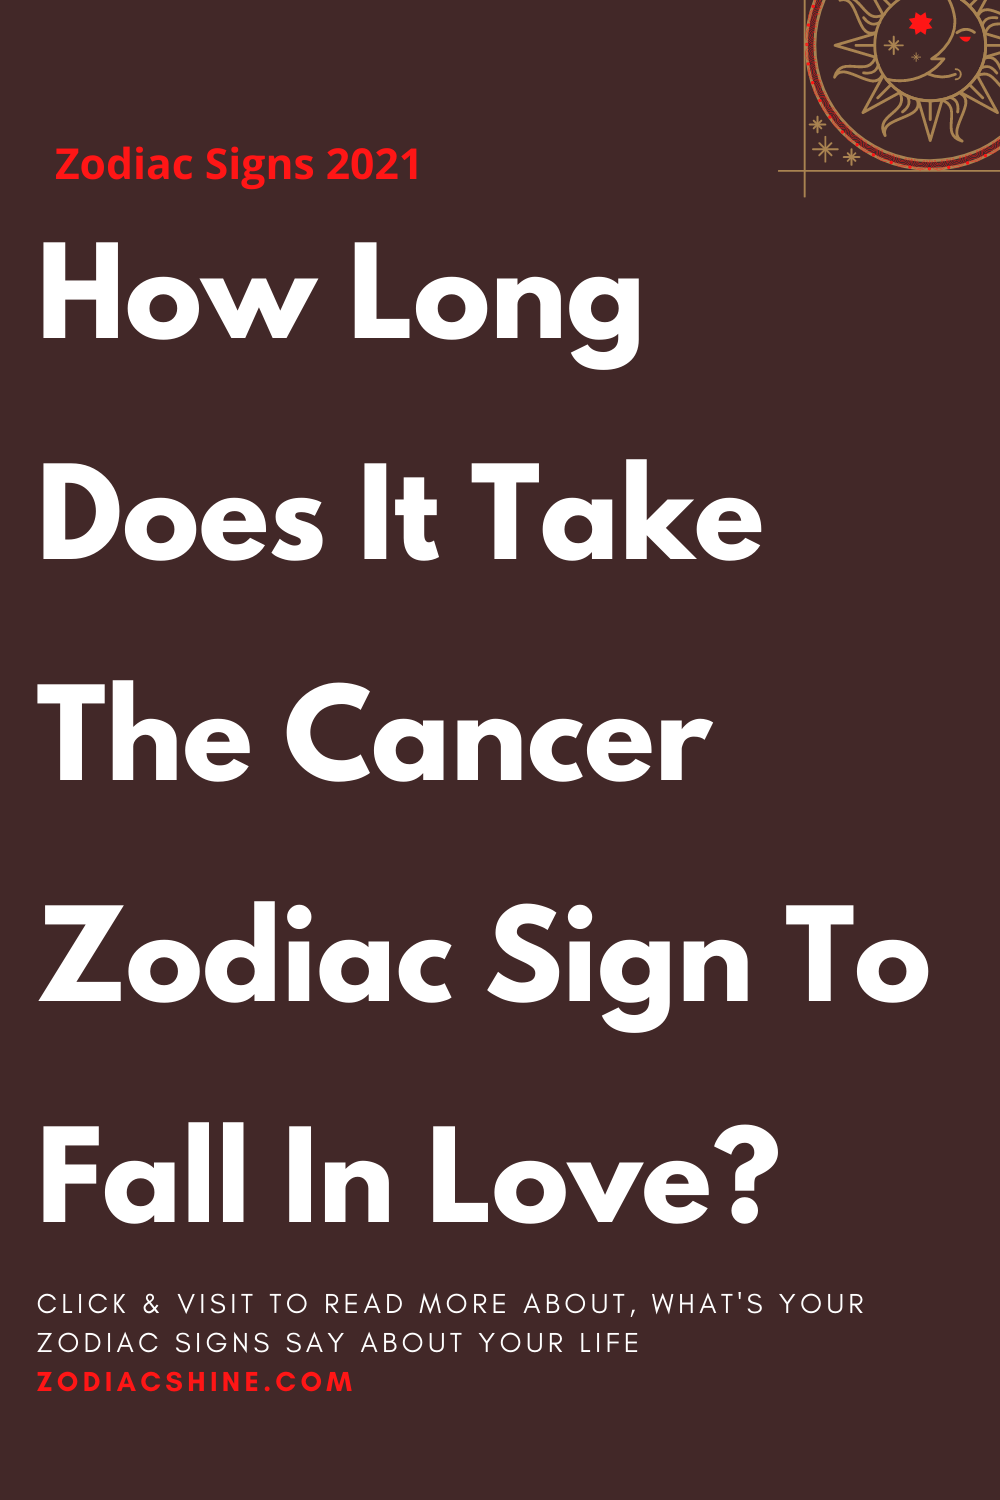 How Long Does It Take The Cancer Zodiac Sign To Fall In Love?